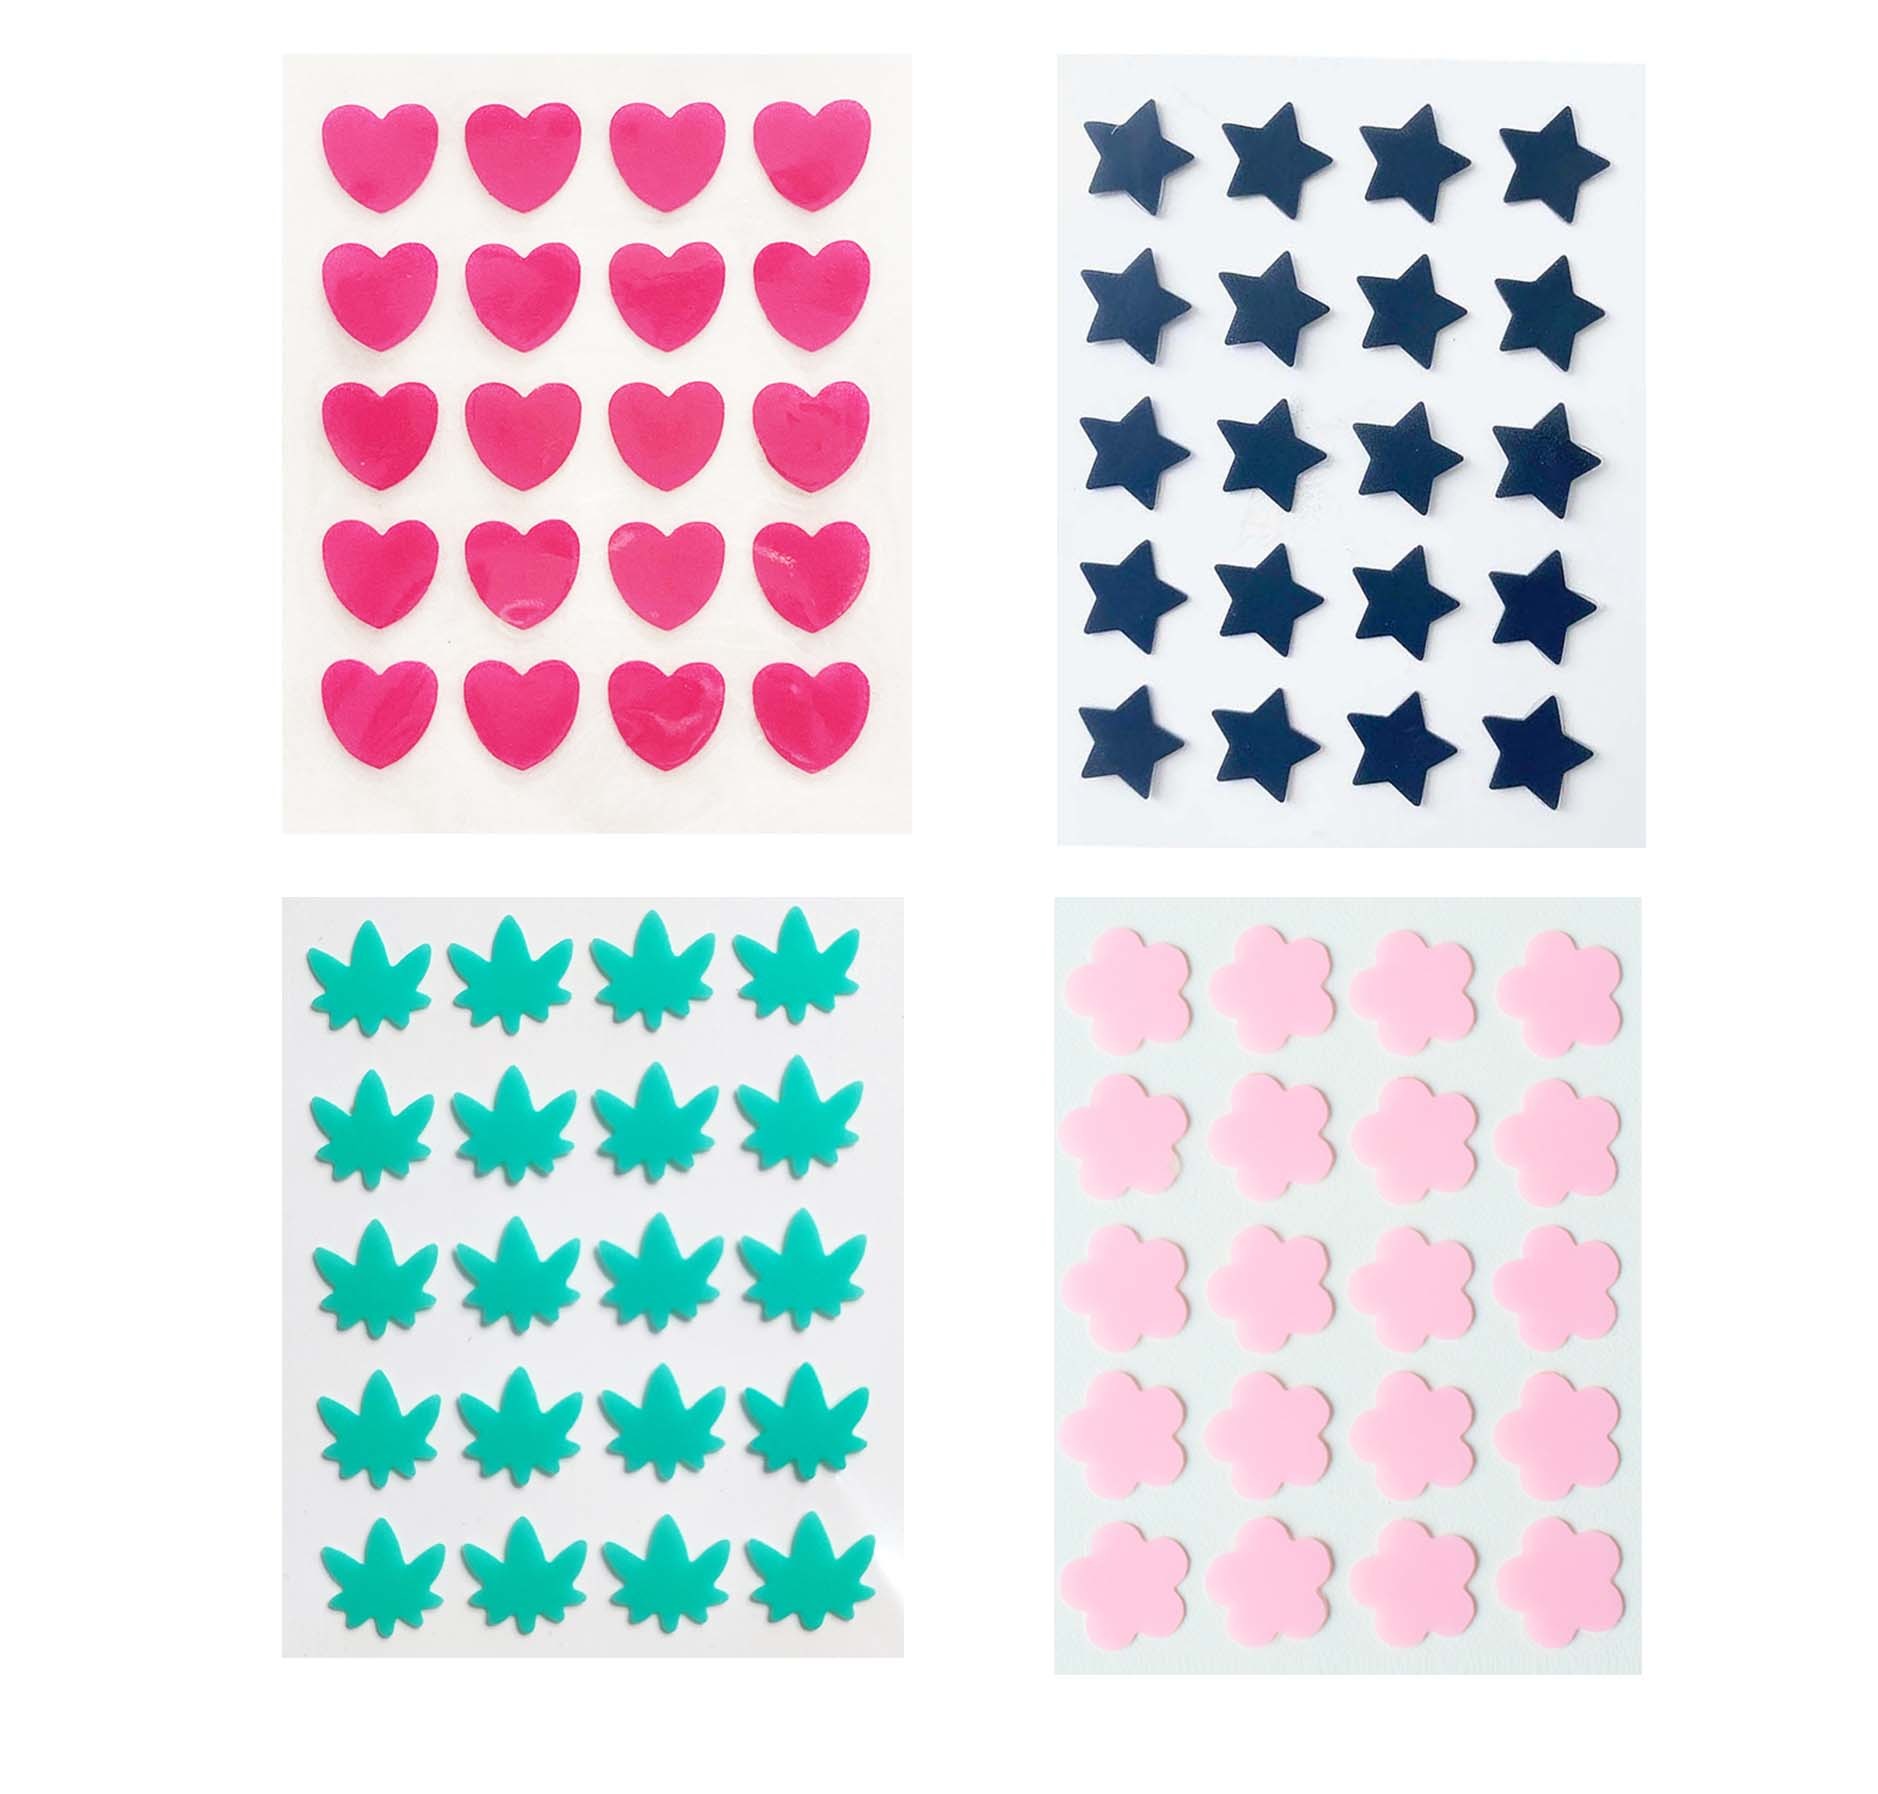 20 dots acne pimple patch with 1 color printing (heart flower leaf star shape)